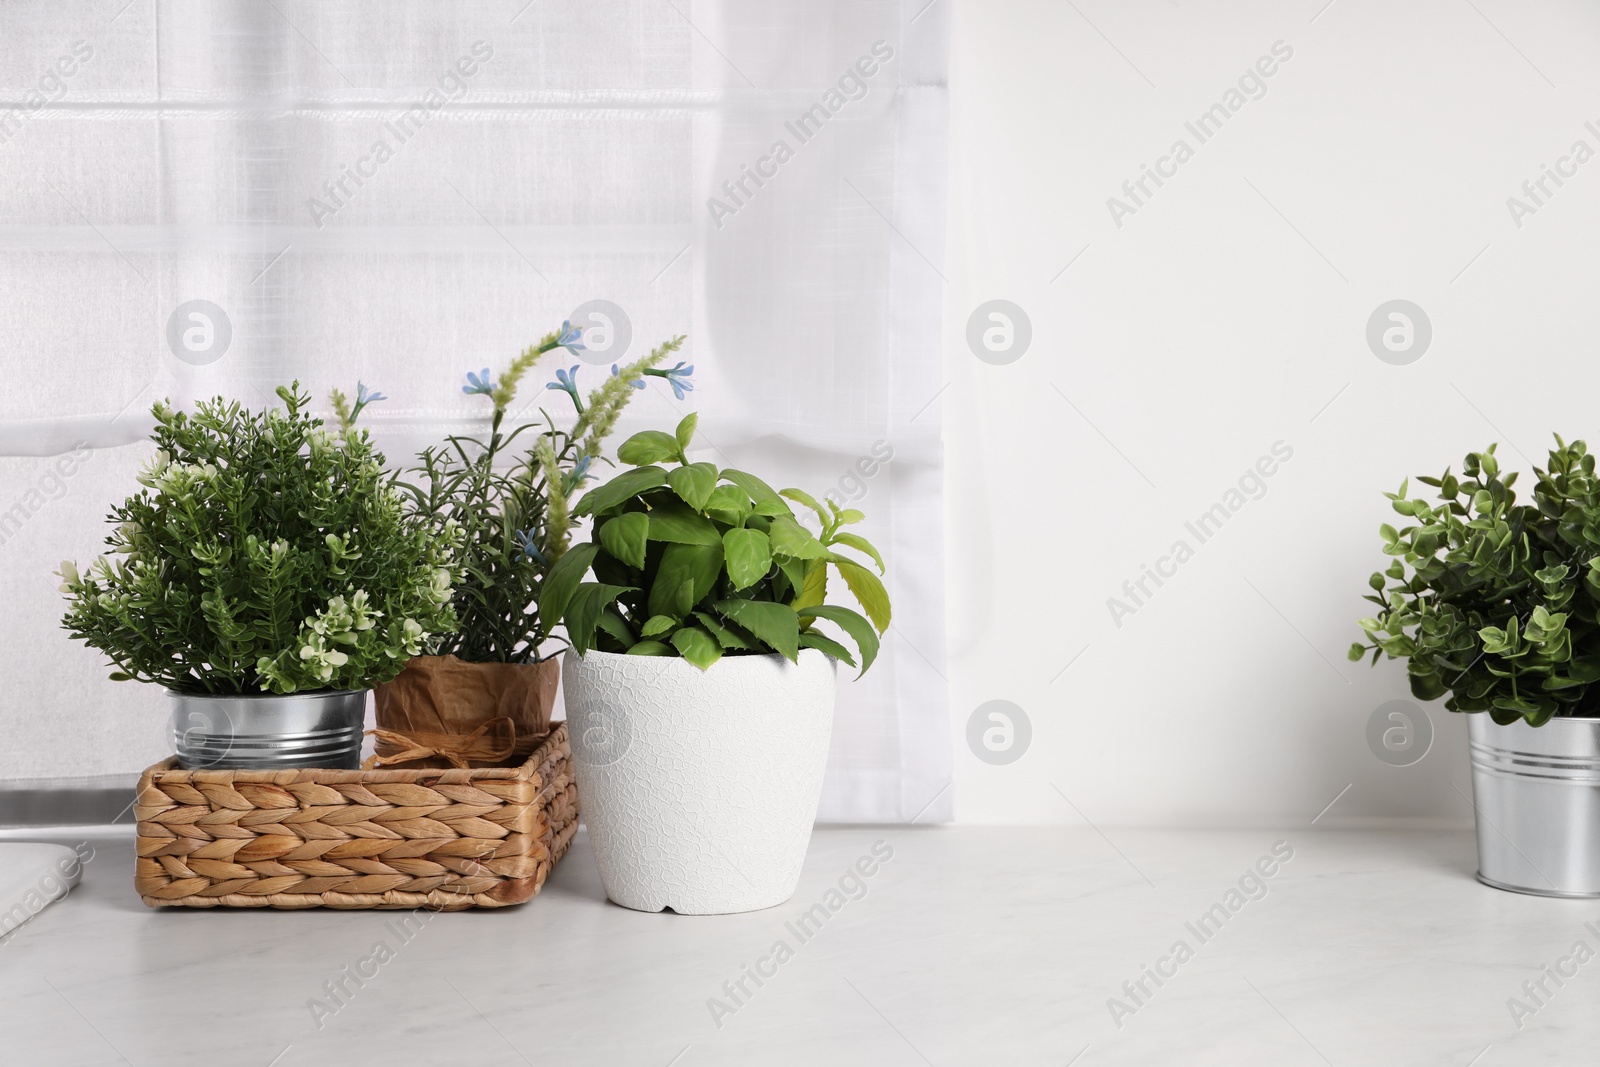 Photo of Artificial potted herbs on white marble countertop in kitchen. Home decor